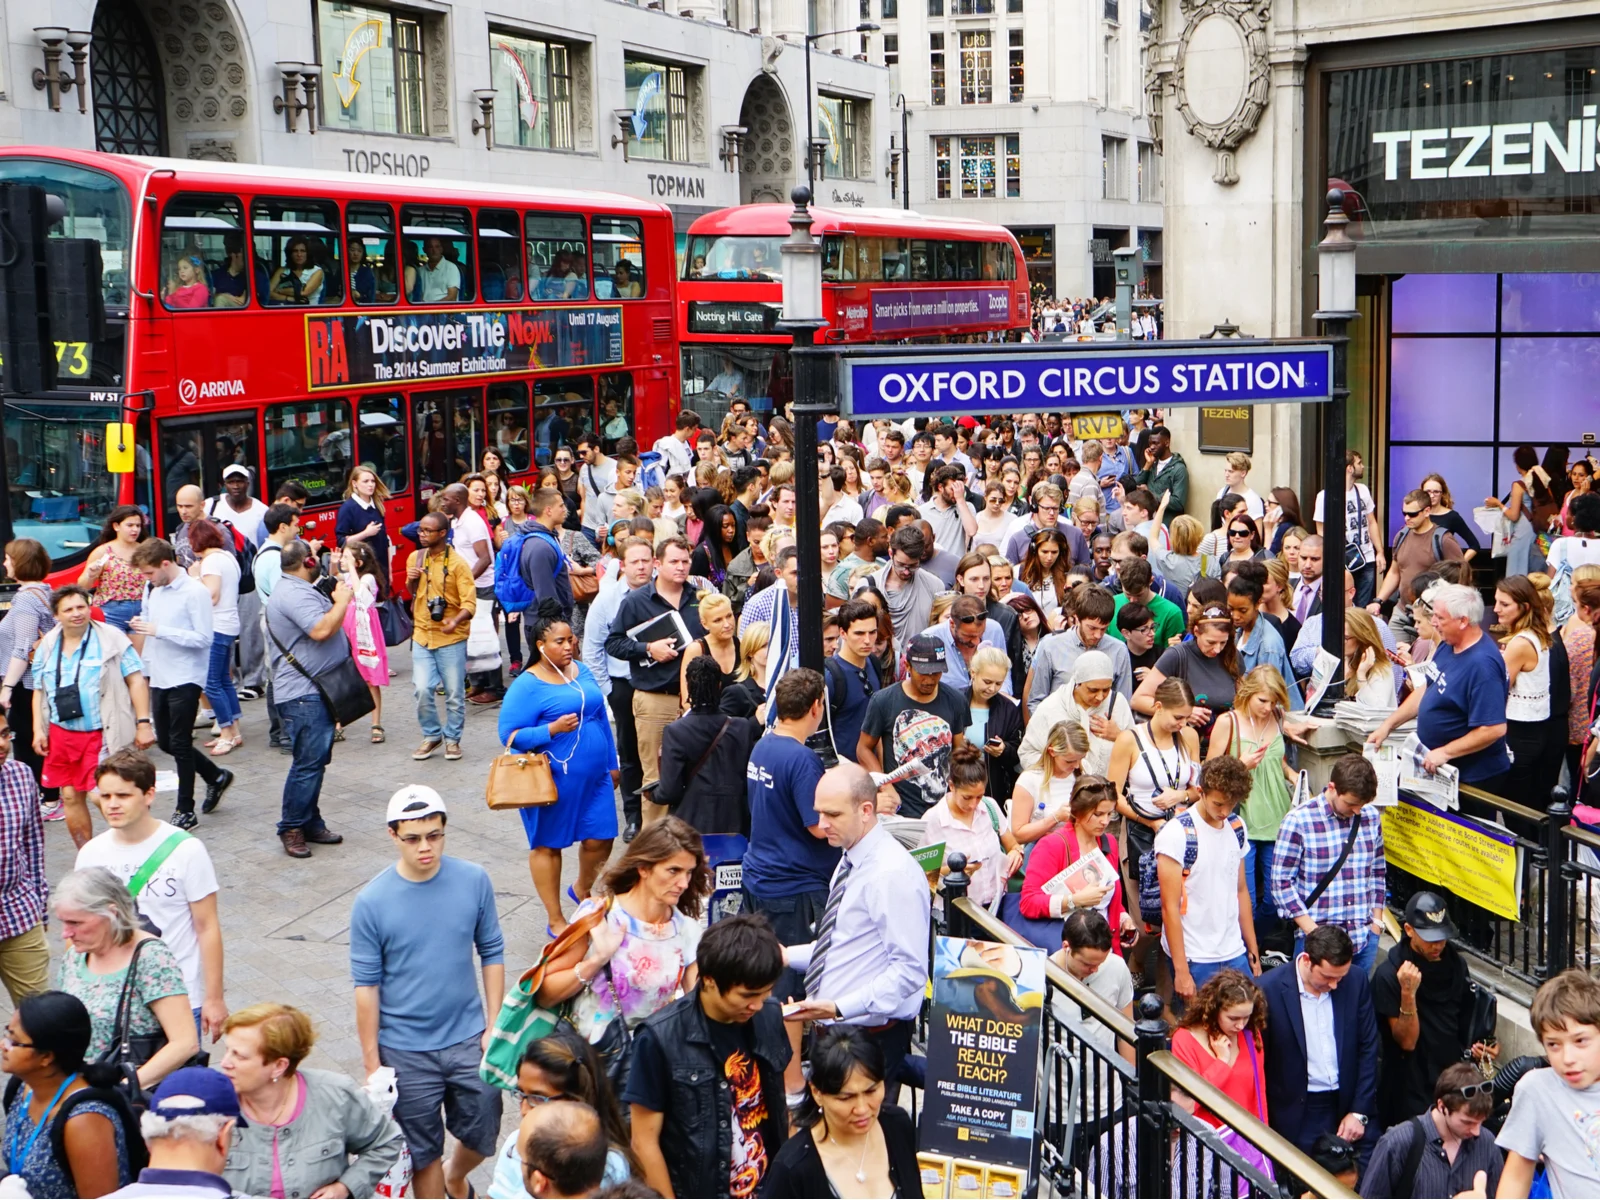 During the worst time to visit London, people are smashed into a street near the famous Oxford Circus Station